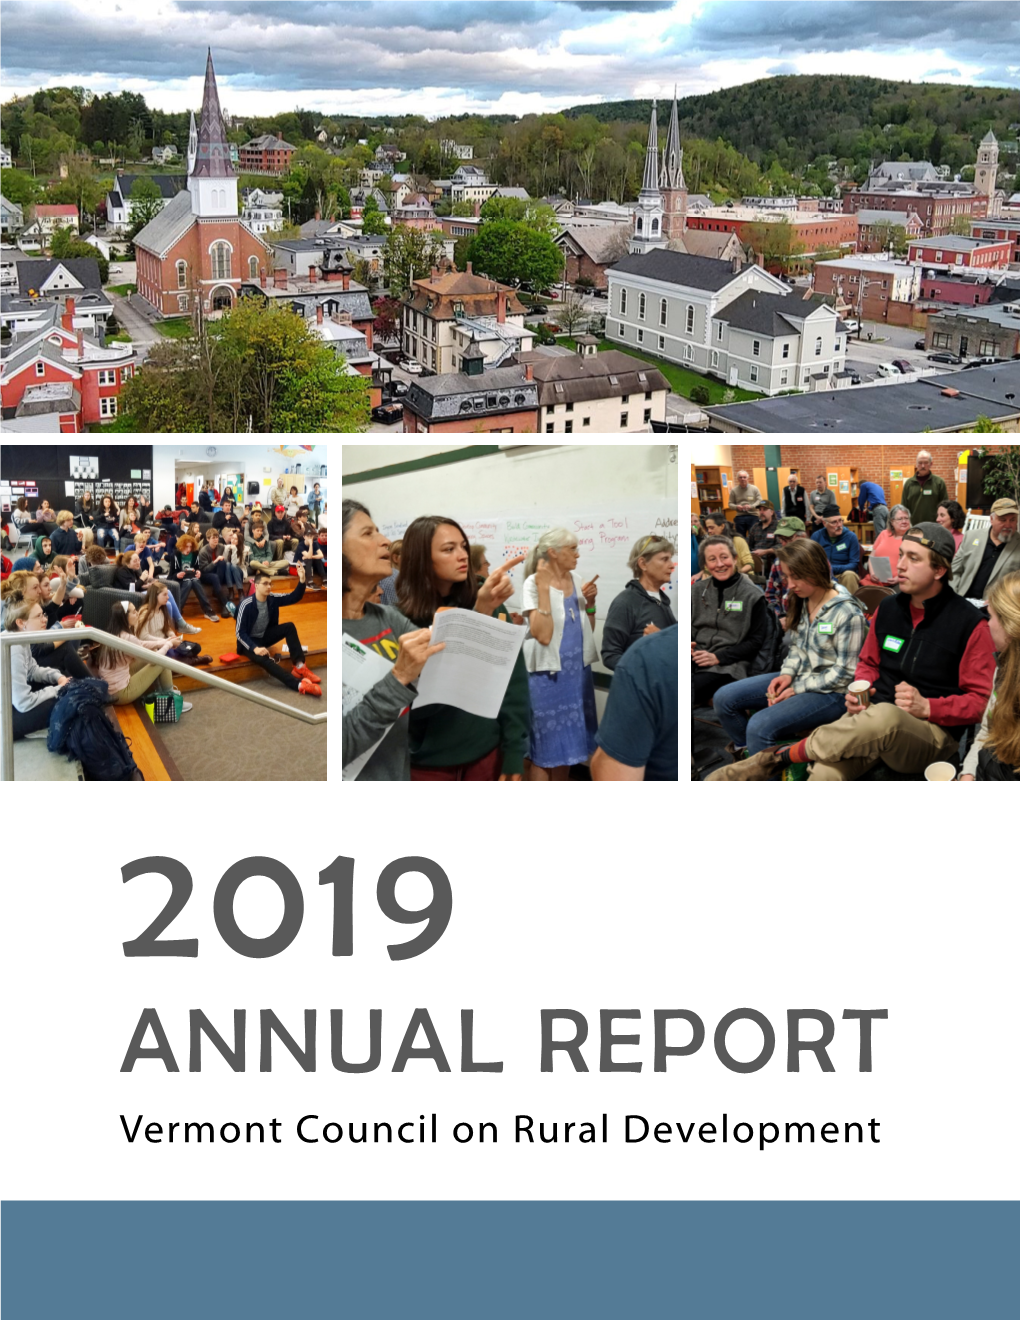 2019 ANNUAL REPORT Vermont Council on Rural Development